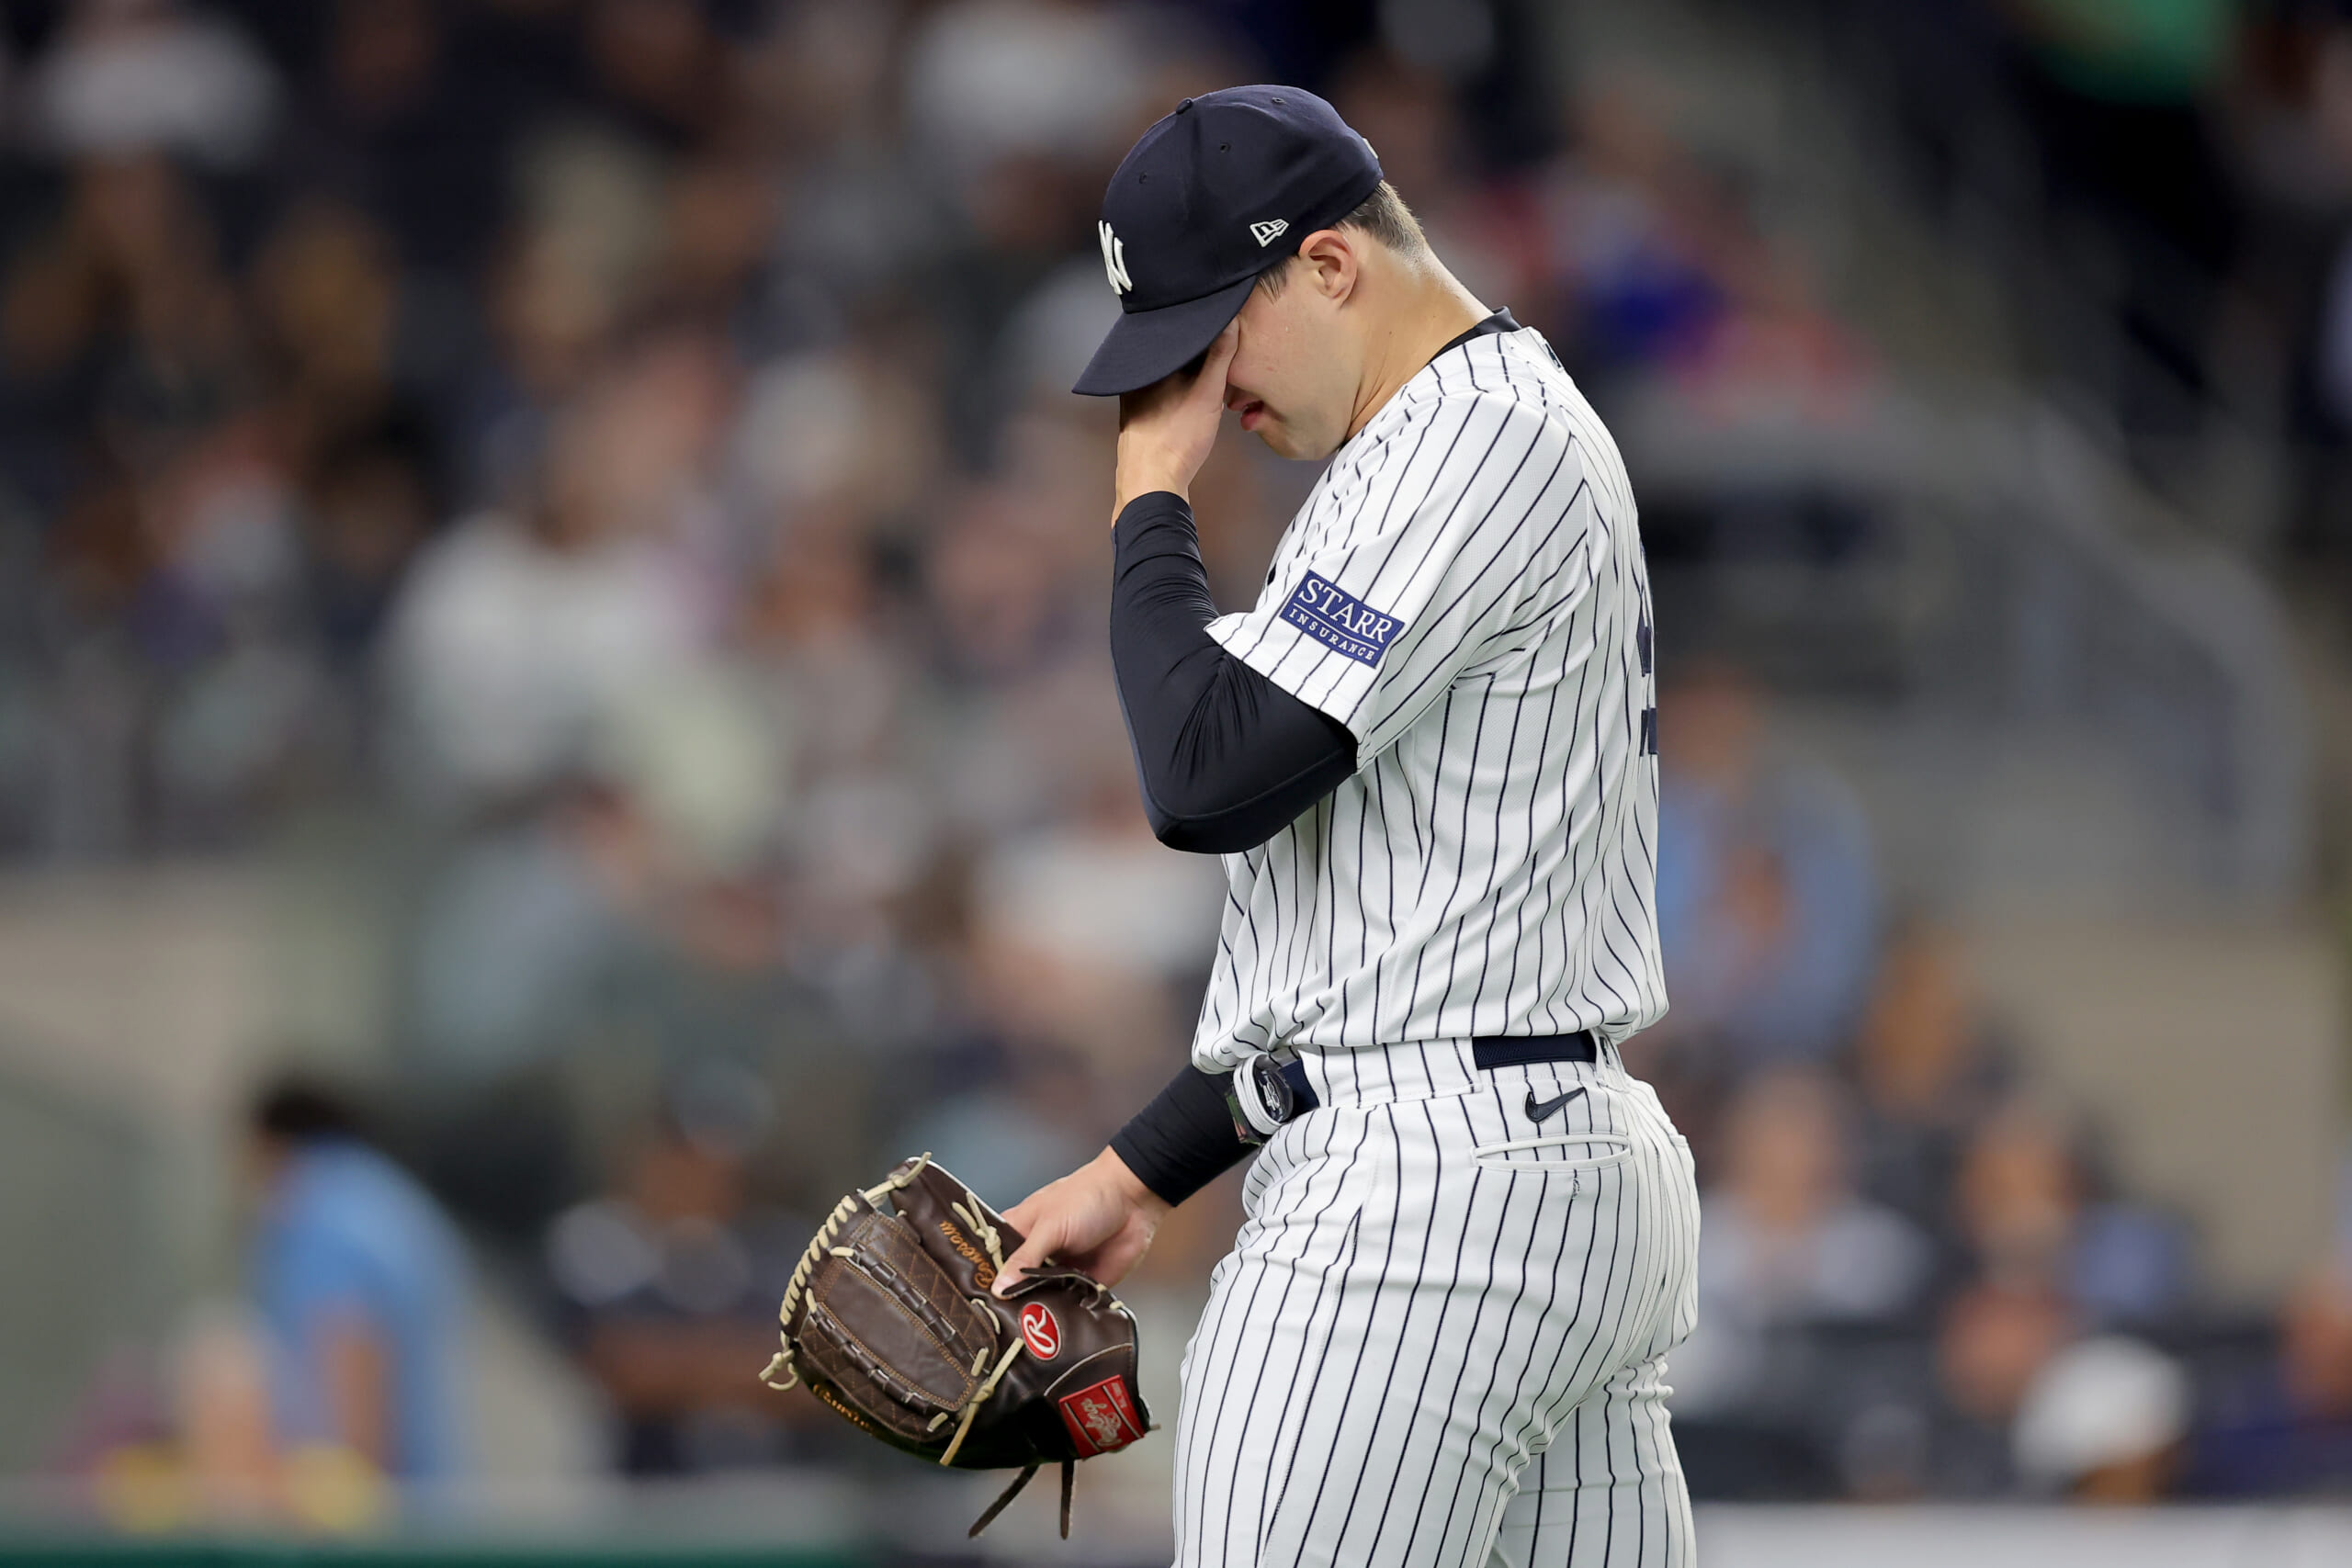 Yankees' Tommy Kahnle reacts to spring training injury 